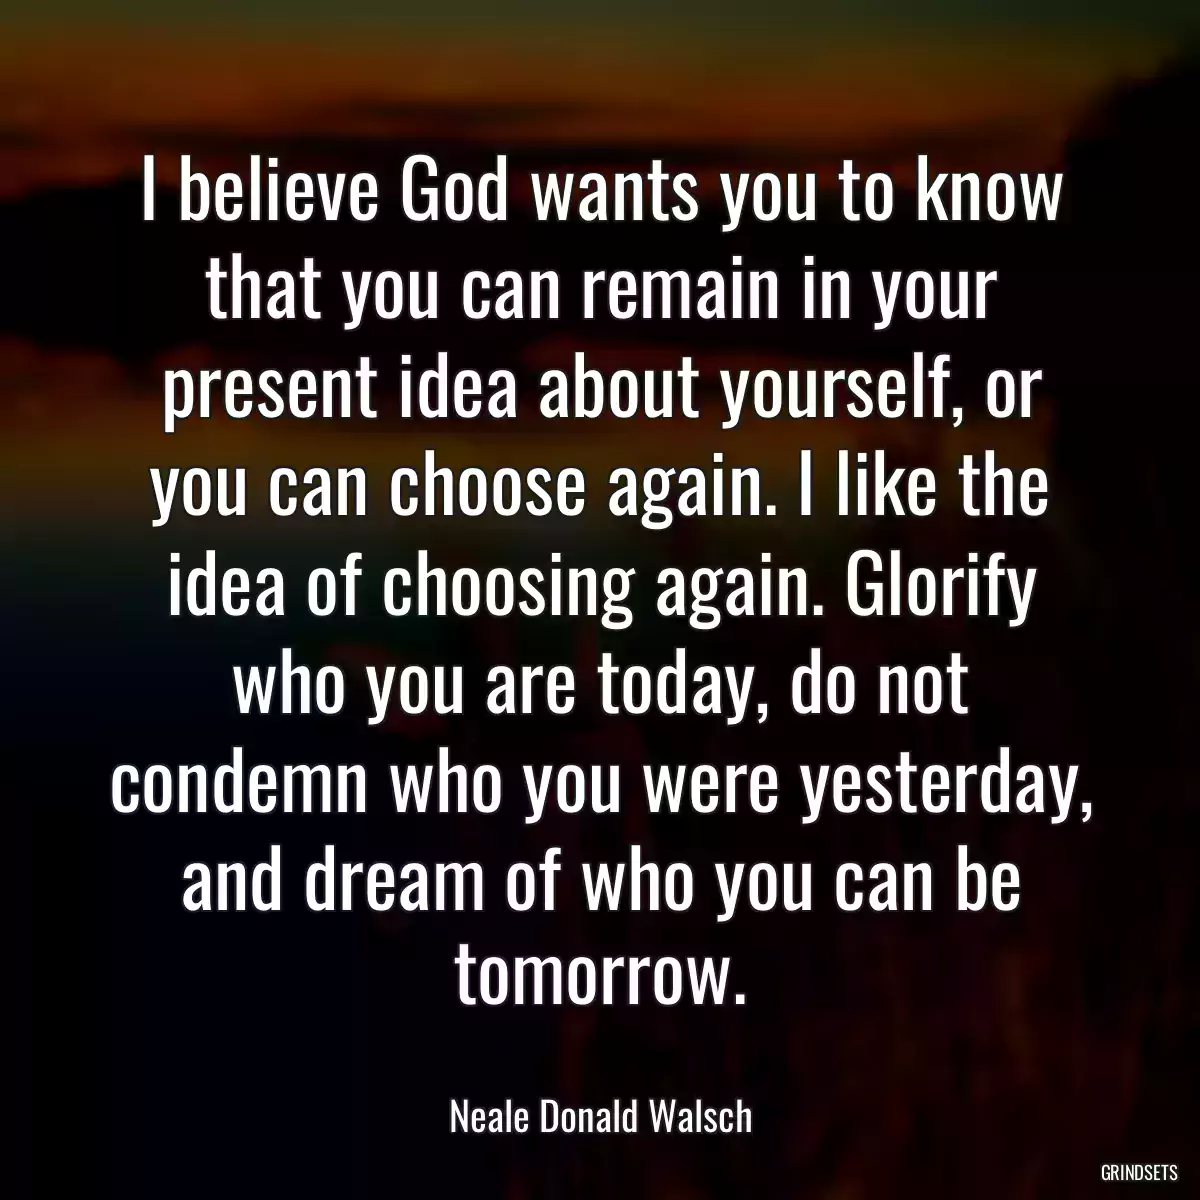 I believe God wants you to know that you can remain in your present idea about yourself, or you can choose again. I like the idea of choosing again. Glorify who you are today, do not condemn who you were yesterday, and dream of who you can be tomorrow.